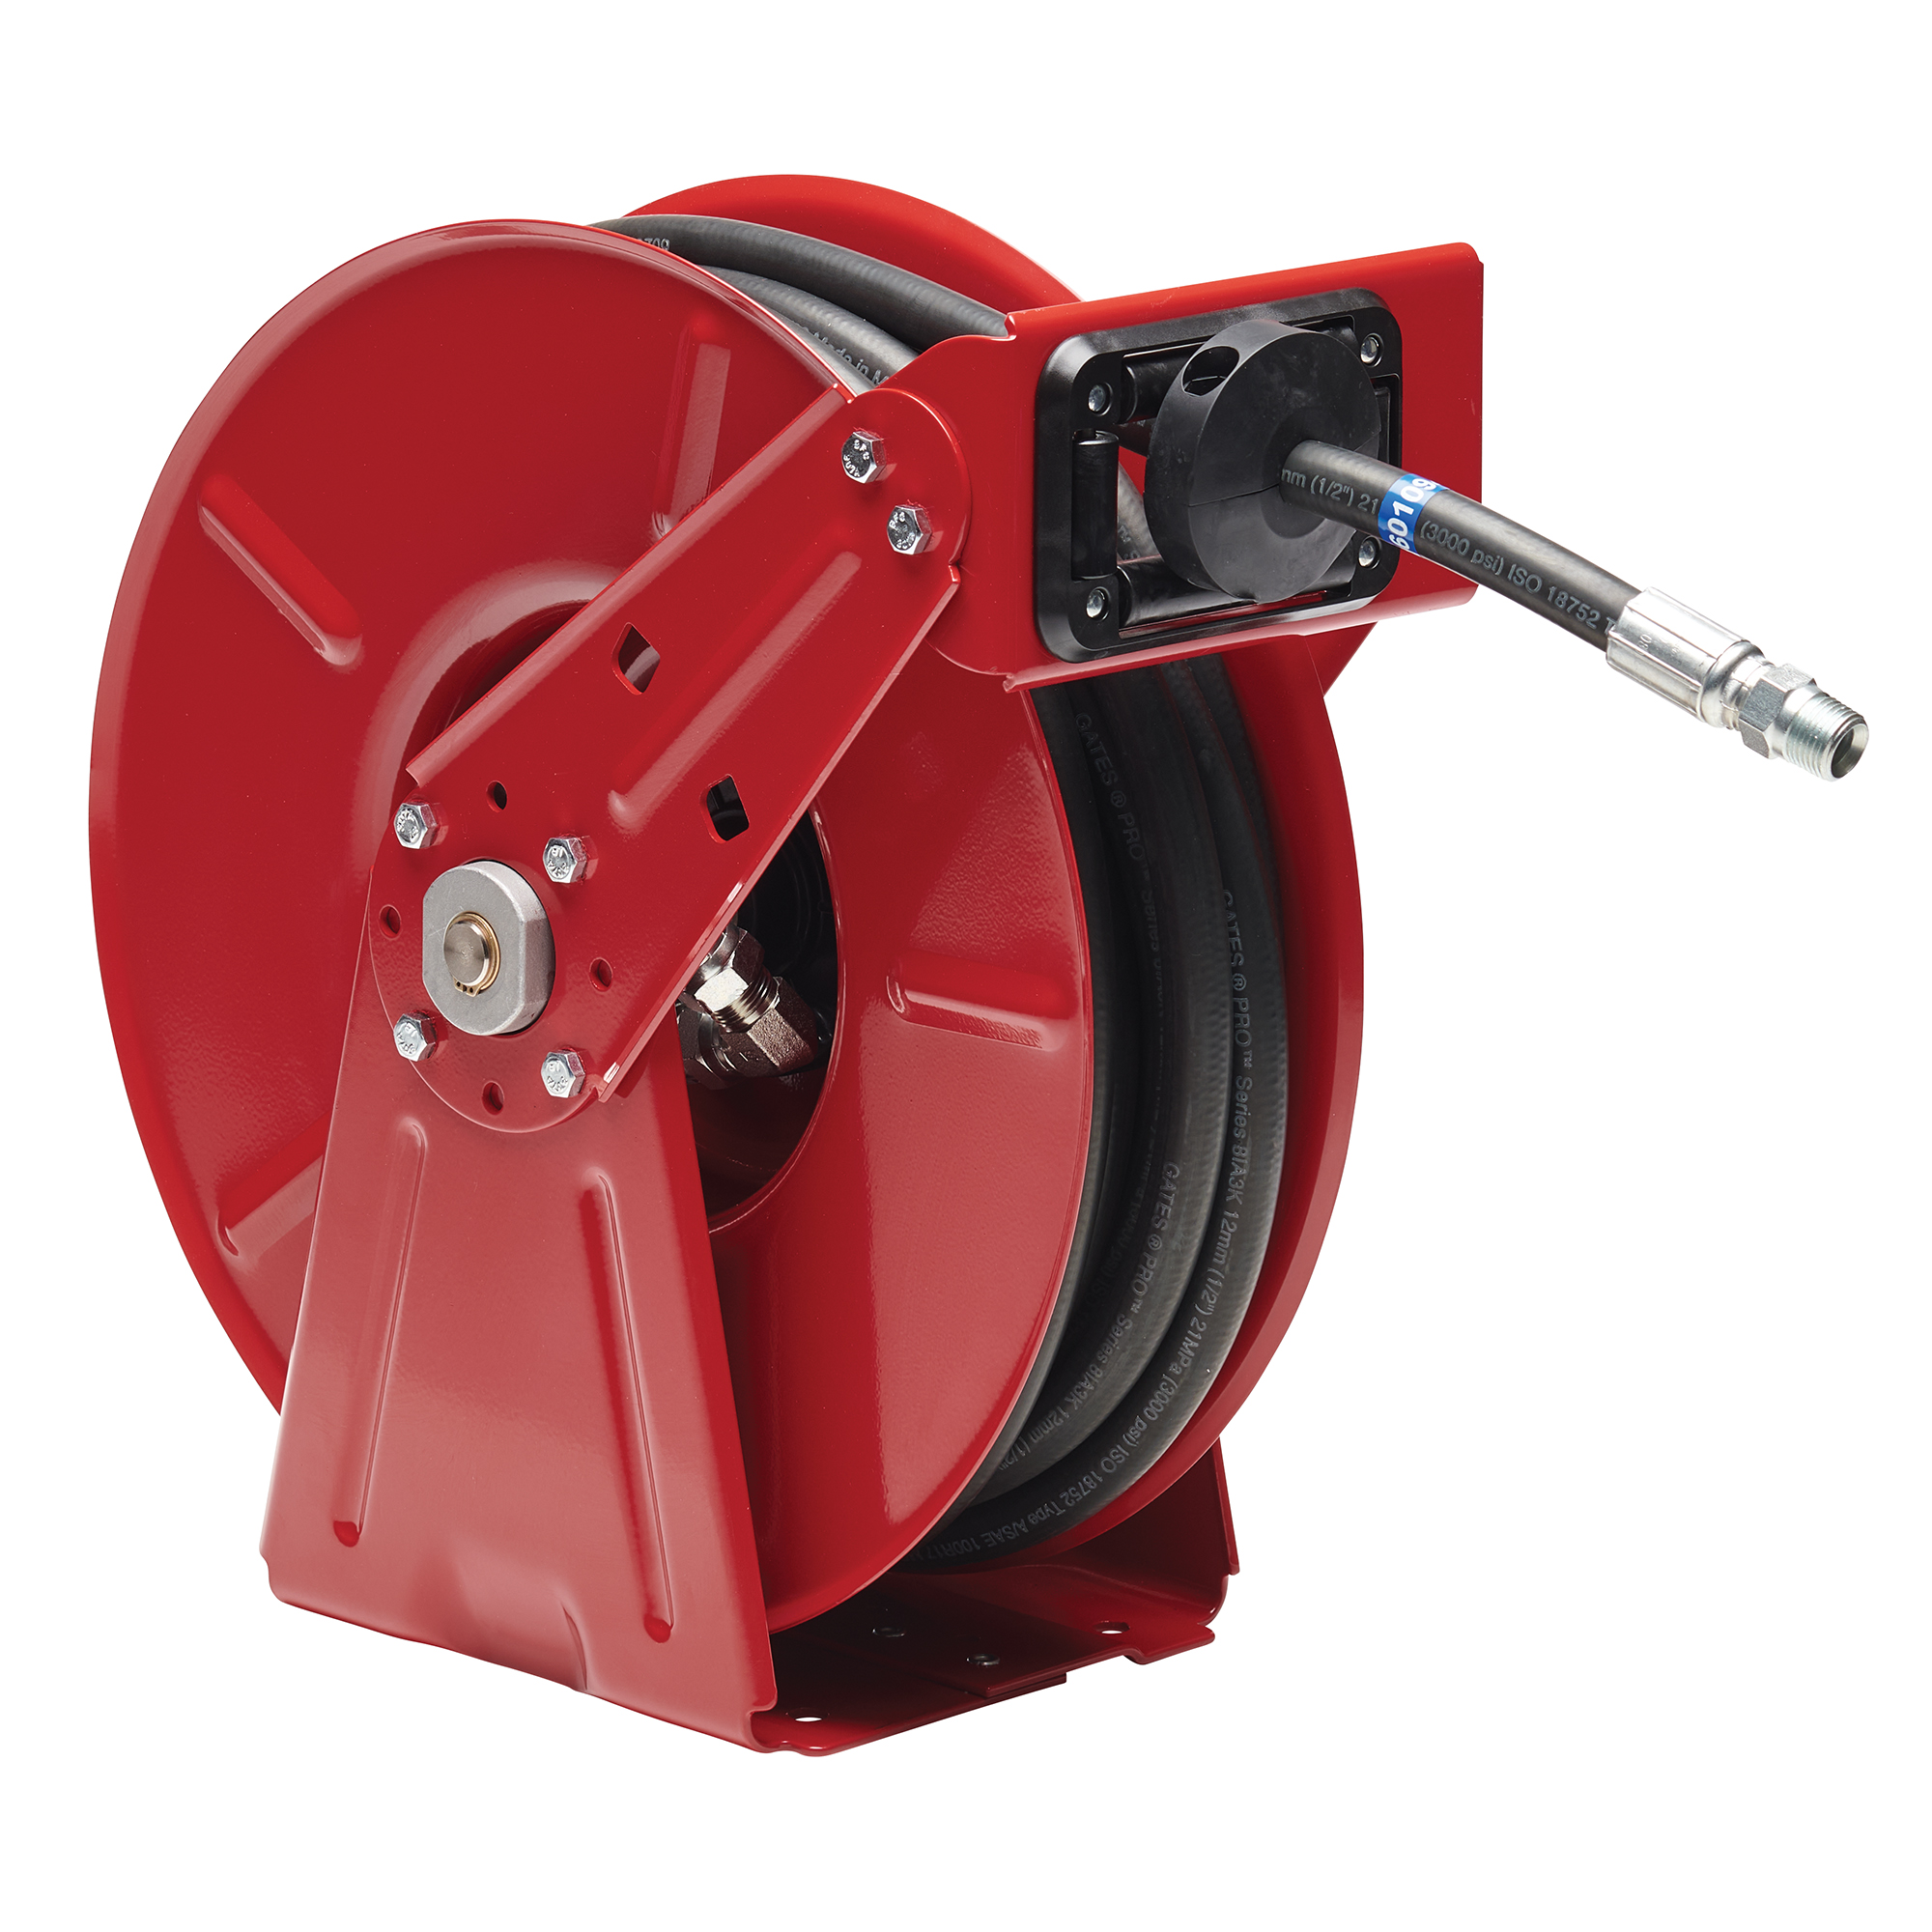 Reelcraft 7850 OMP 1/2-Inch by 50-Feet Spring Driven Hose Reel for Oil